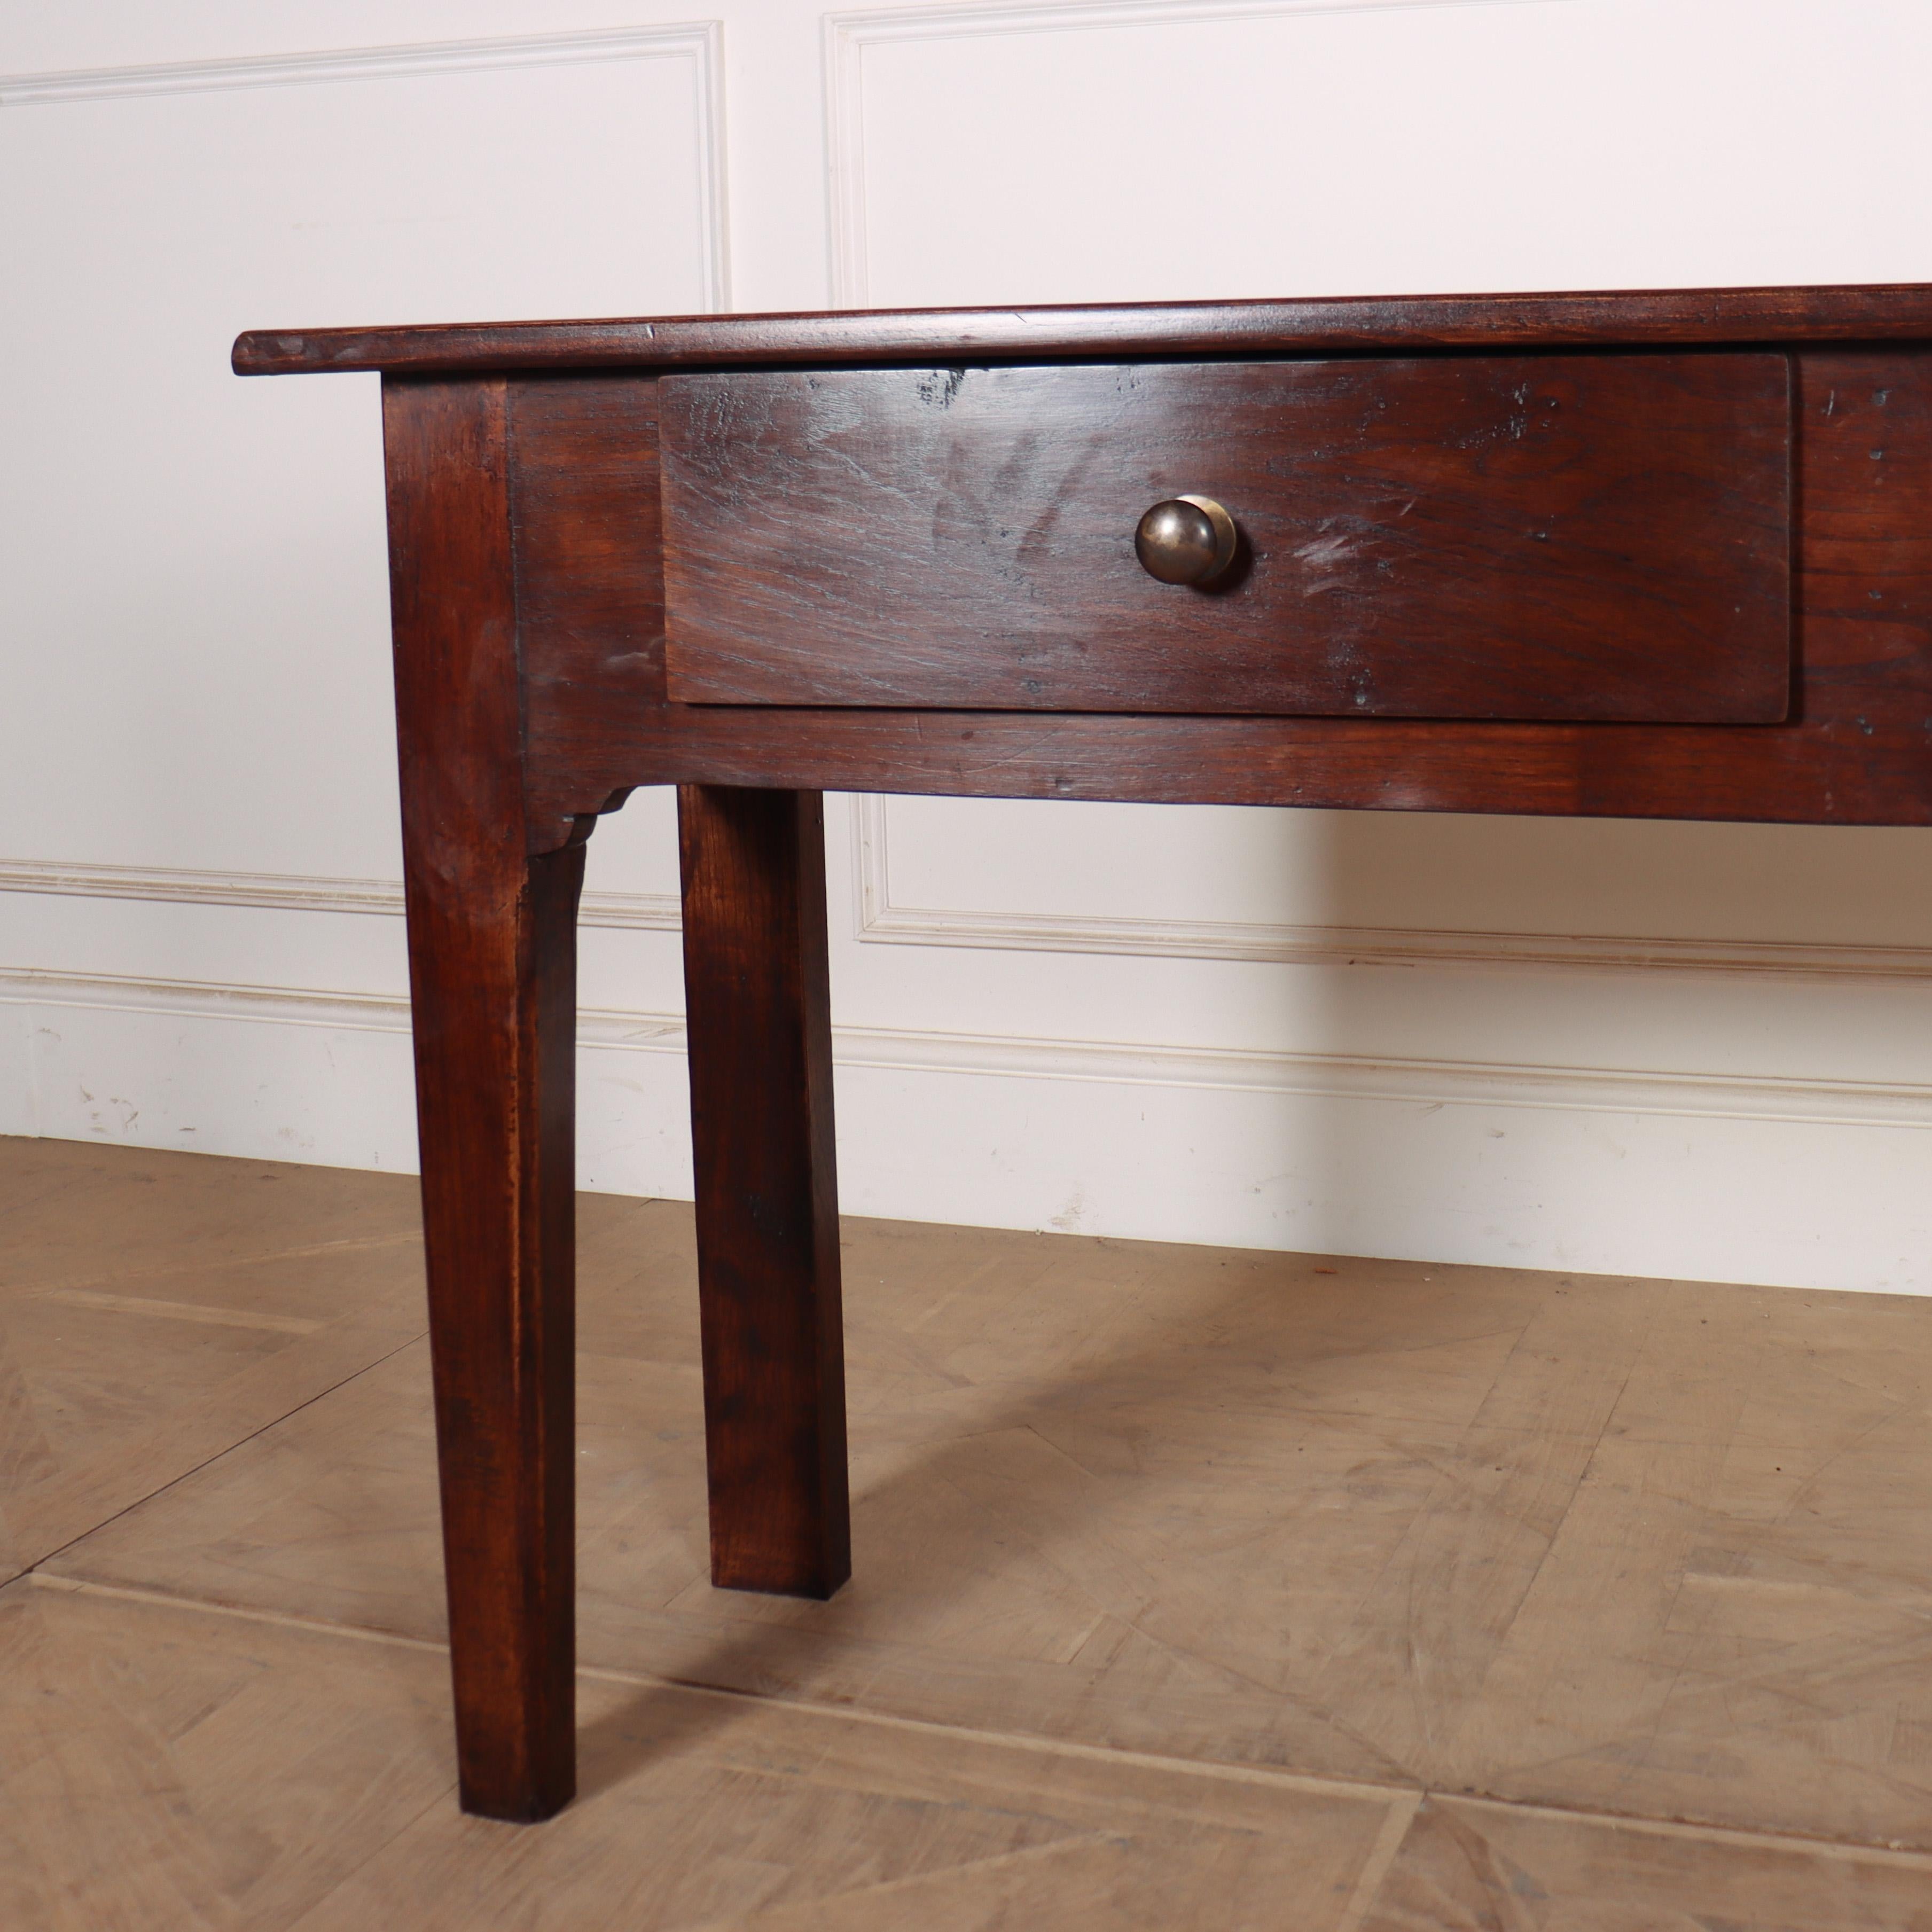 19th century French chestnut and oak 3 drawer serving table. 1860.

Reference: 7892

Dimensions
78 inches (198 cms) Wide
15.5 inches (39 cms) Deep
31 inches (79 cms) High